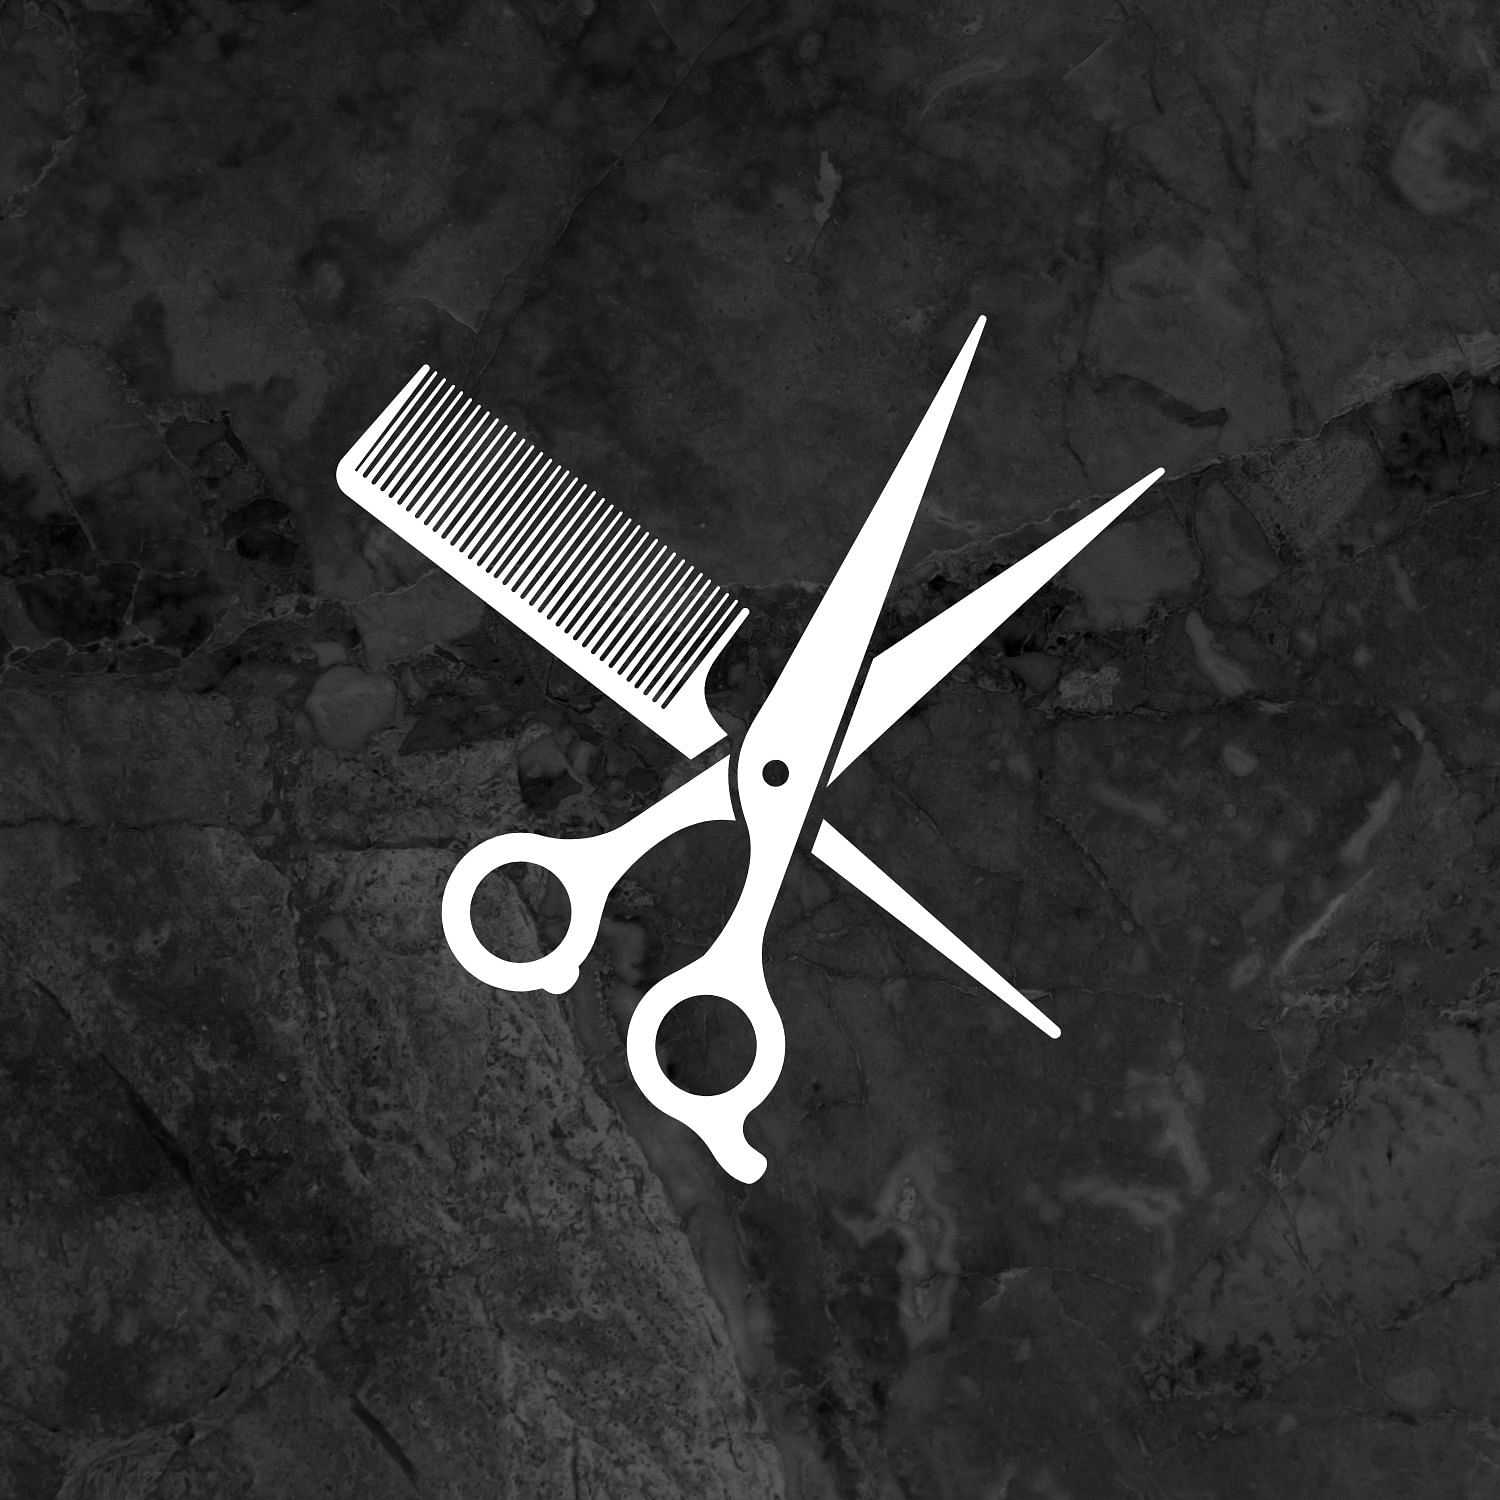 Scissors and comb silhouette on a cracked stone background.